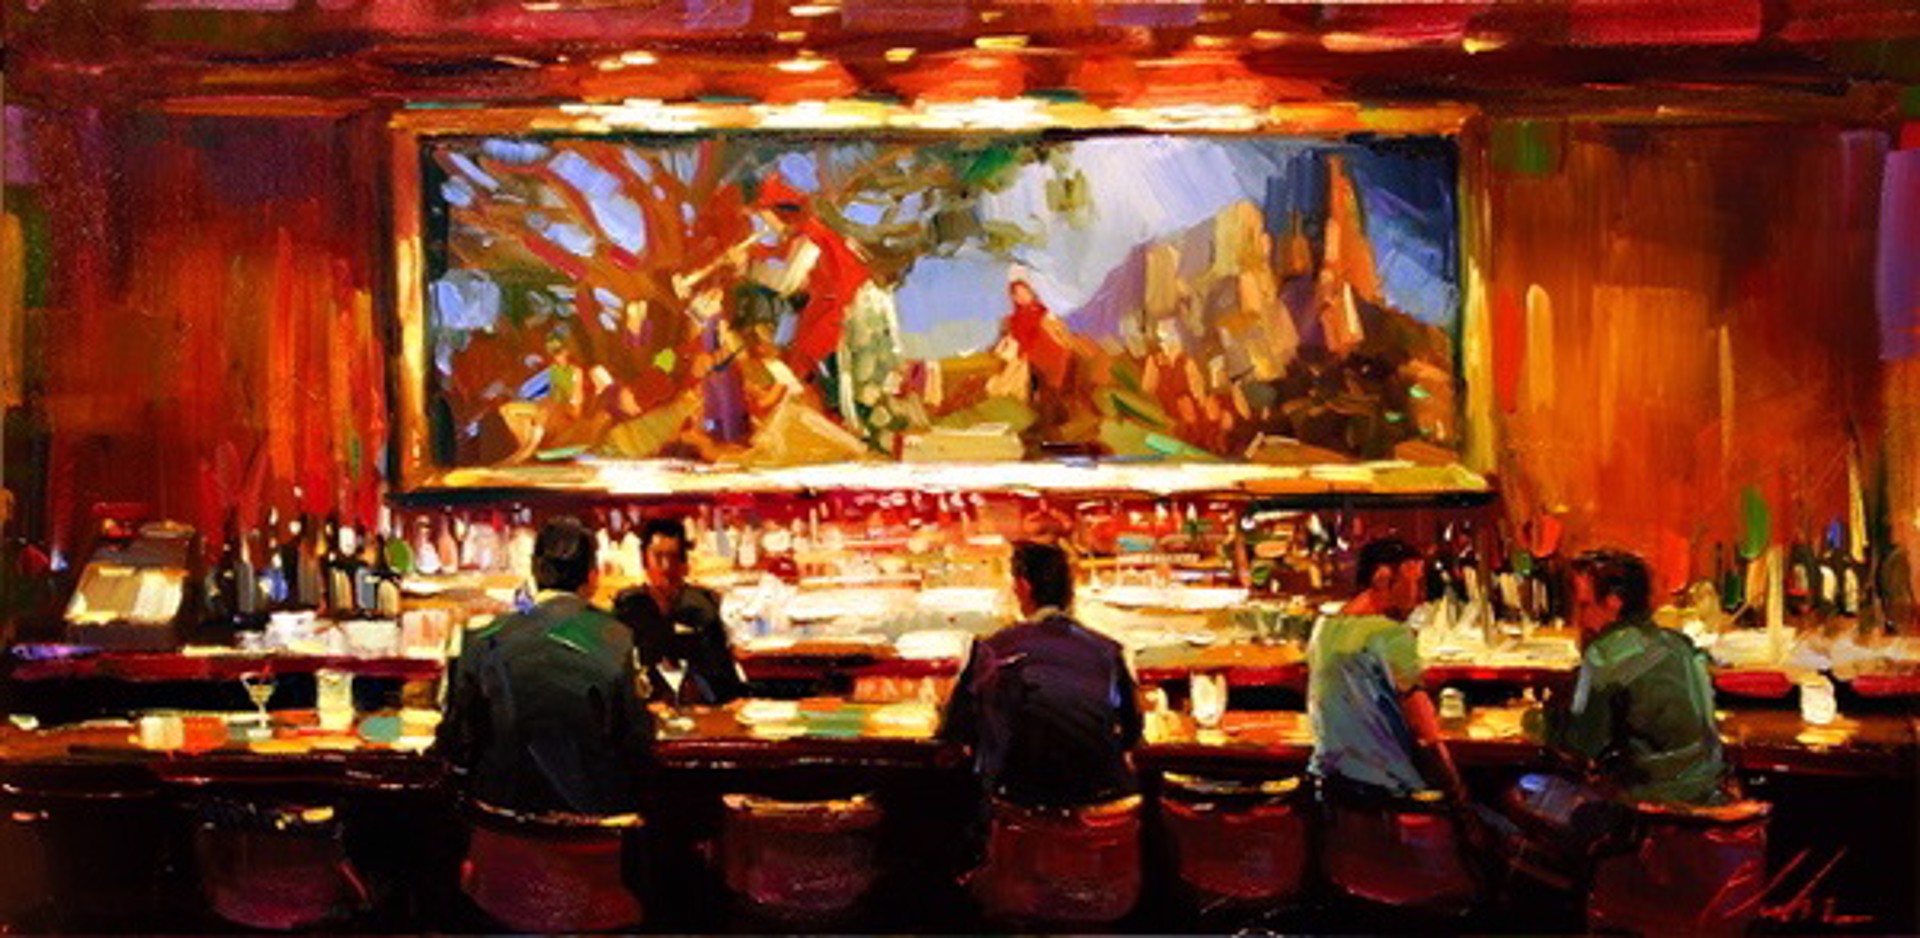 Martini Lounge (Includes Collector's Book!) by Michael Flohr